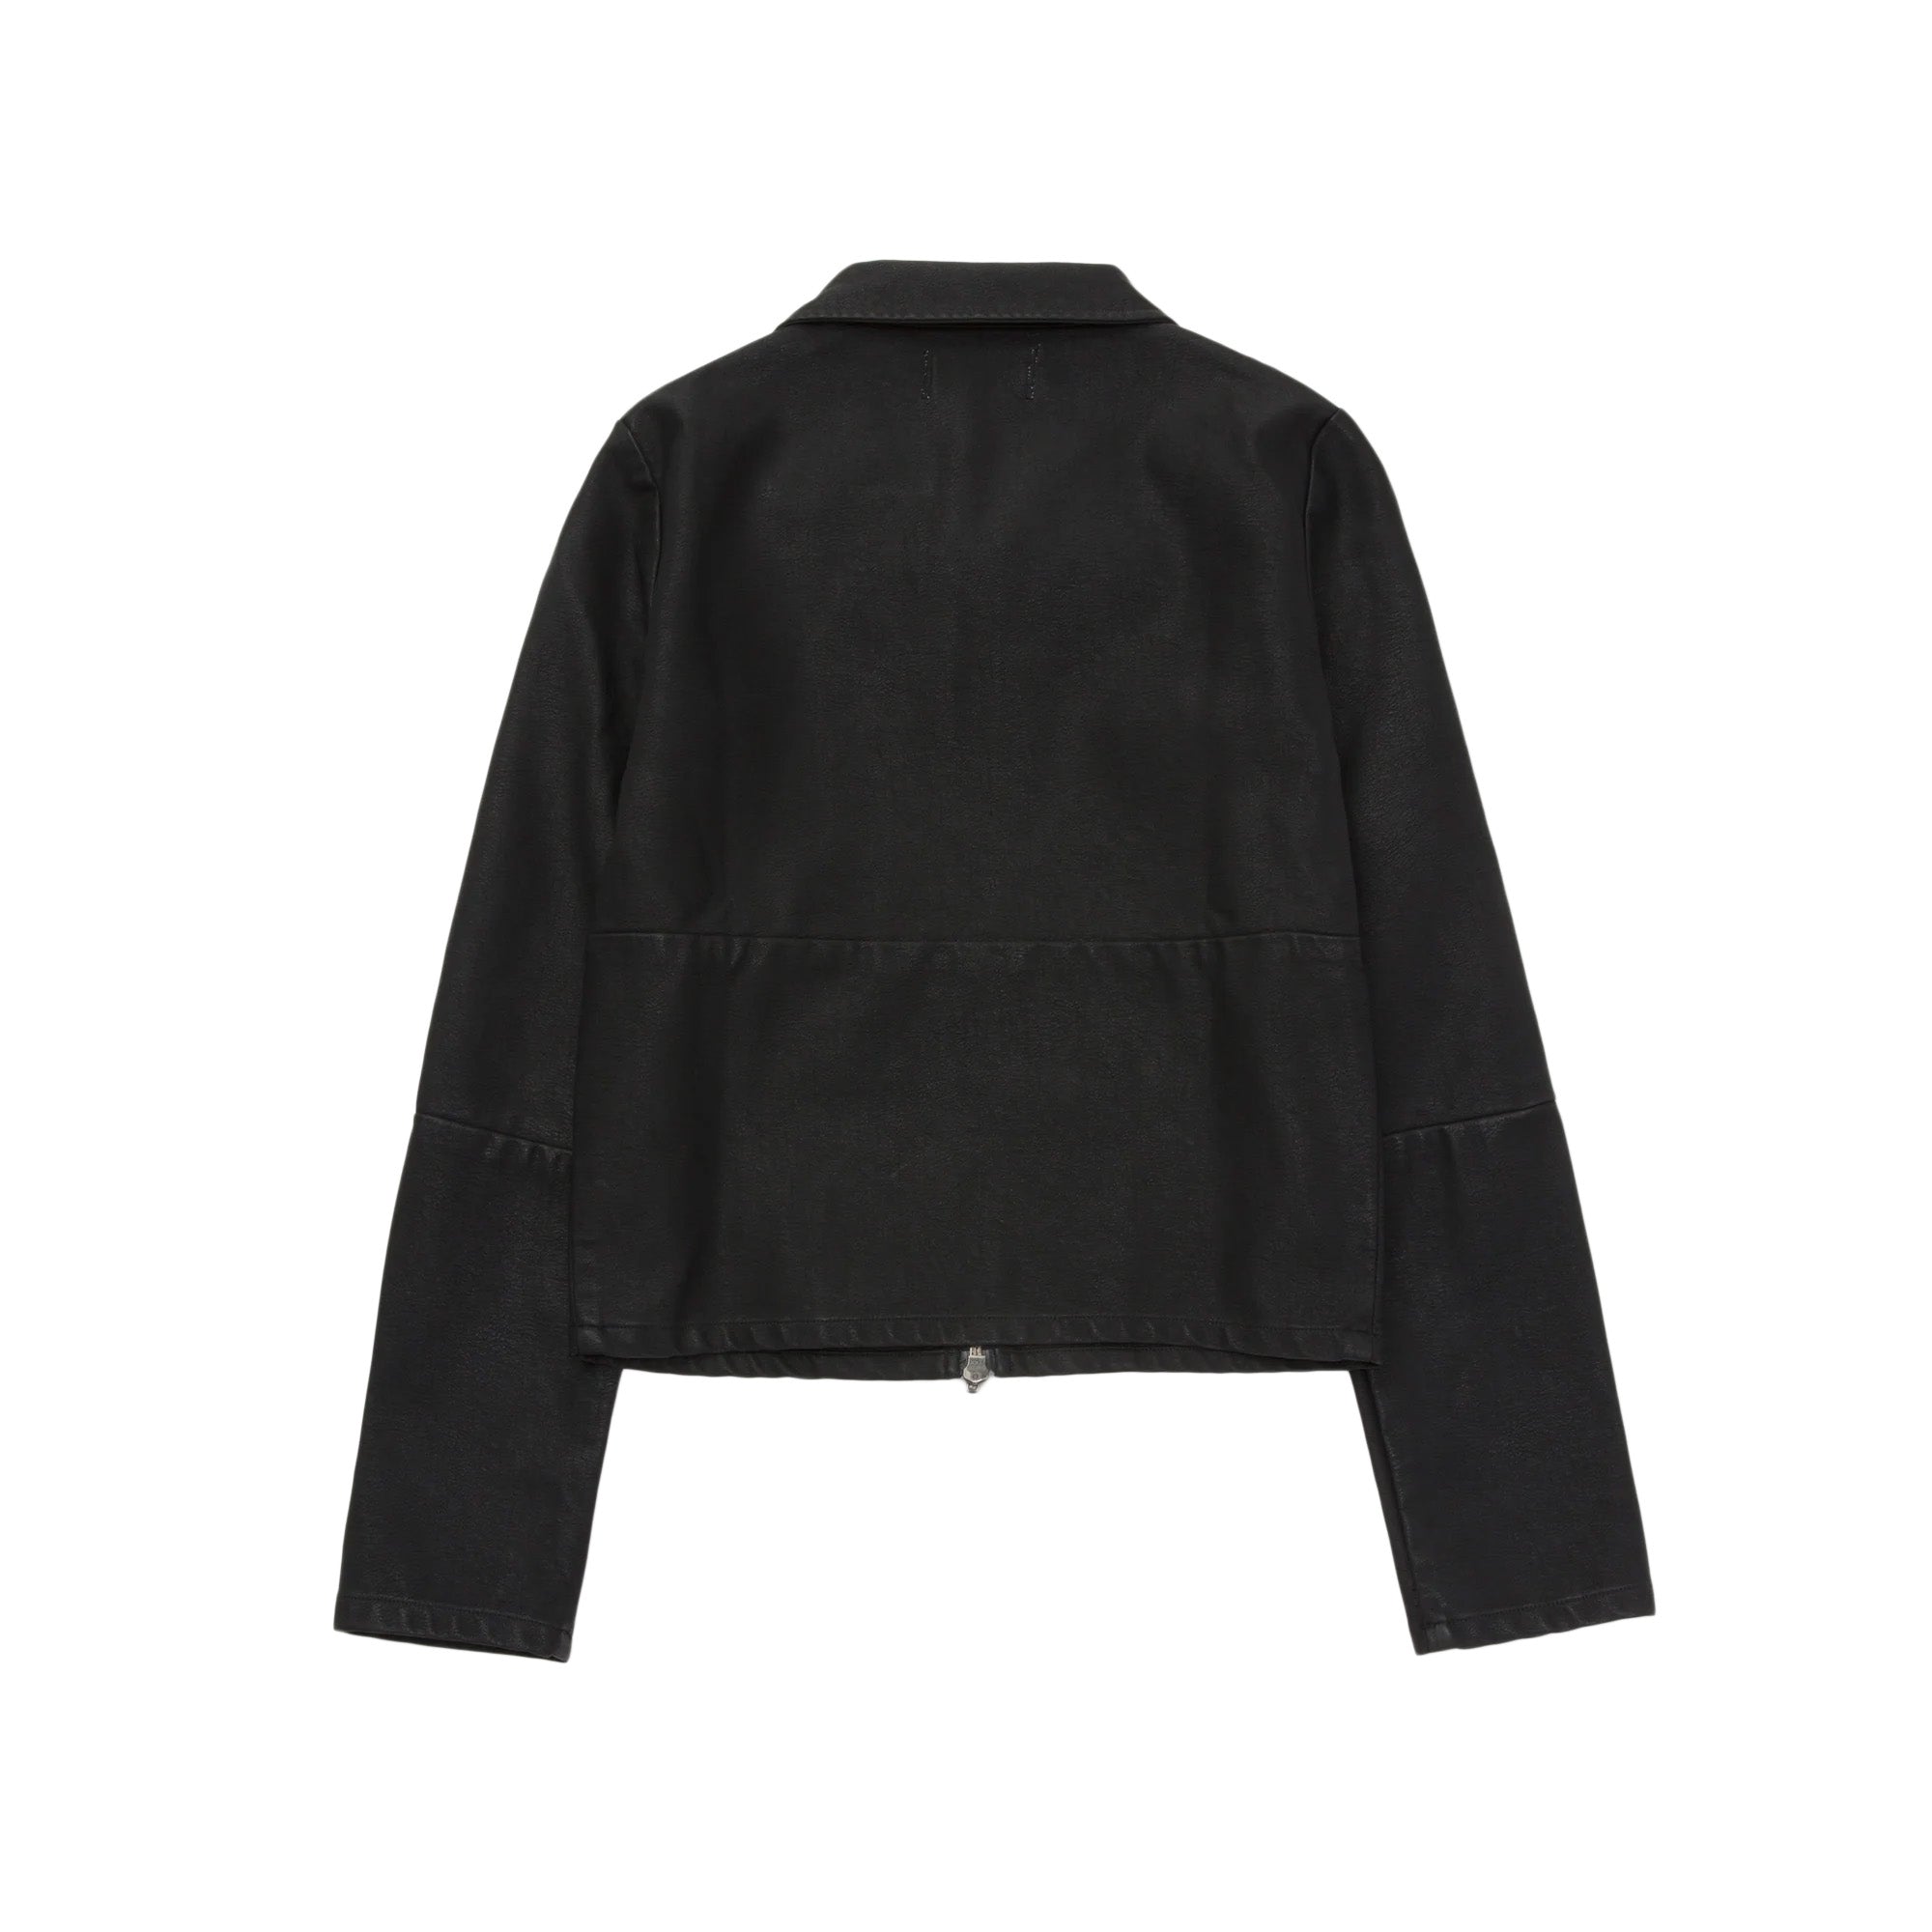 Womens Honor The Gift Double Sided Zip Top 'Black'